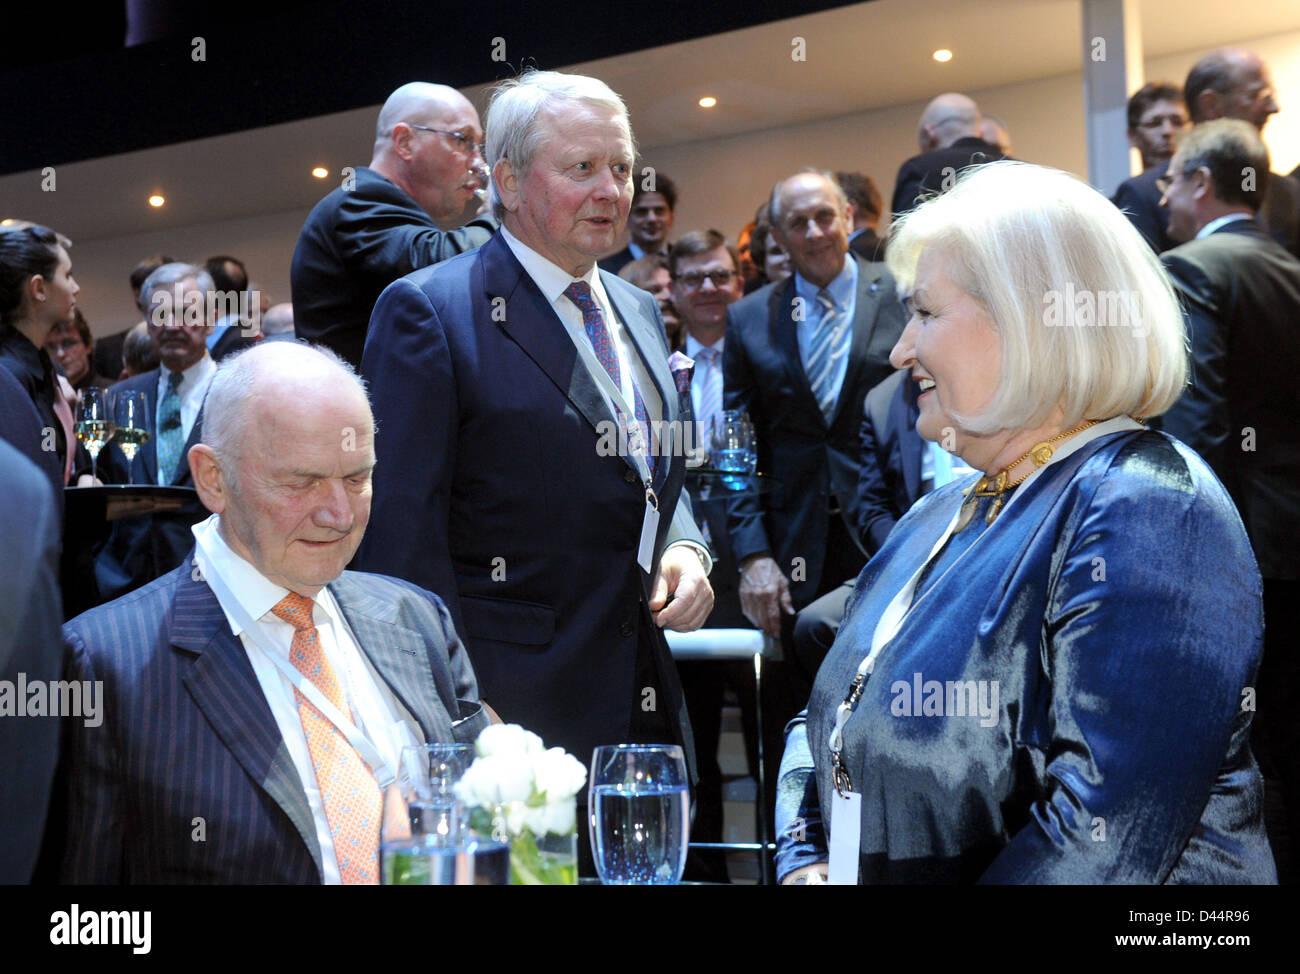 Ferdinand Piech (L), chairman of the supervisory board of Volkswagen, his wife and supervisory board member Ursula Piech and Wolfgang Porsche, chairman of the supervisory board of Porsche (C), attend a motor show hosted by the Volkswagen Group on the evening prior to the first press day of the 83rd International Motor Show Geneva in Geneva, Switzerland, 04 March 2013. Photo: Uli Deck Stock Photo